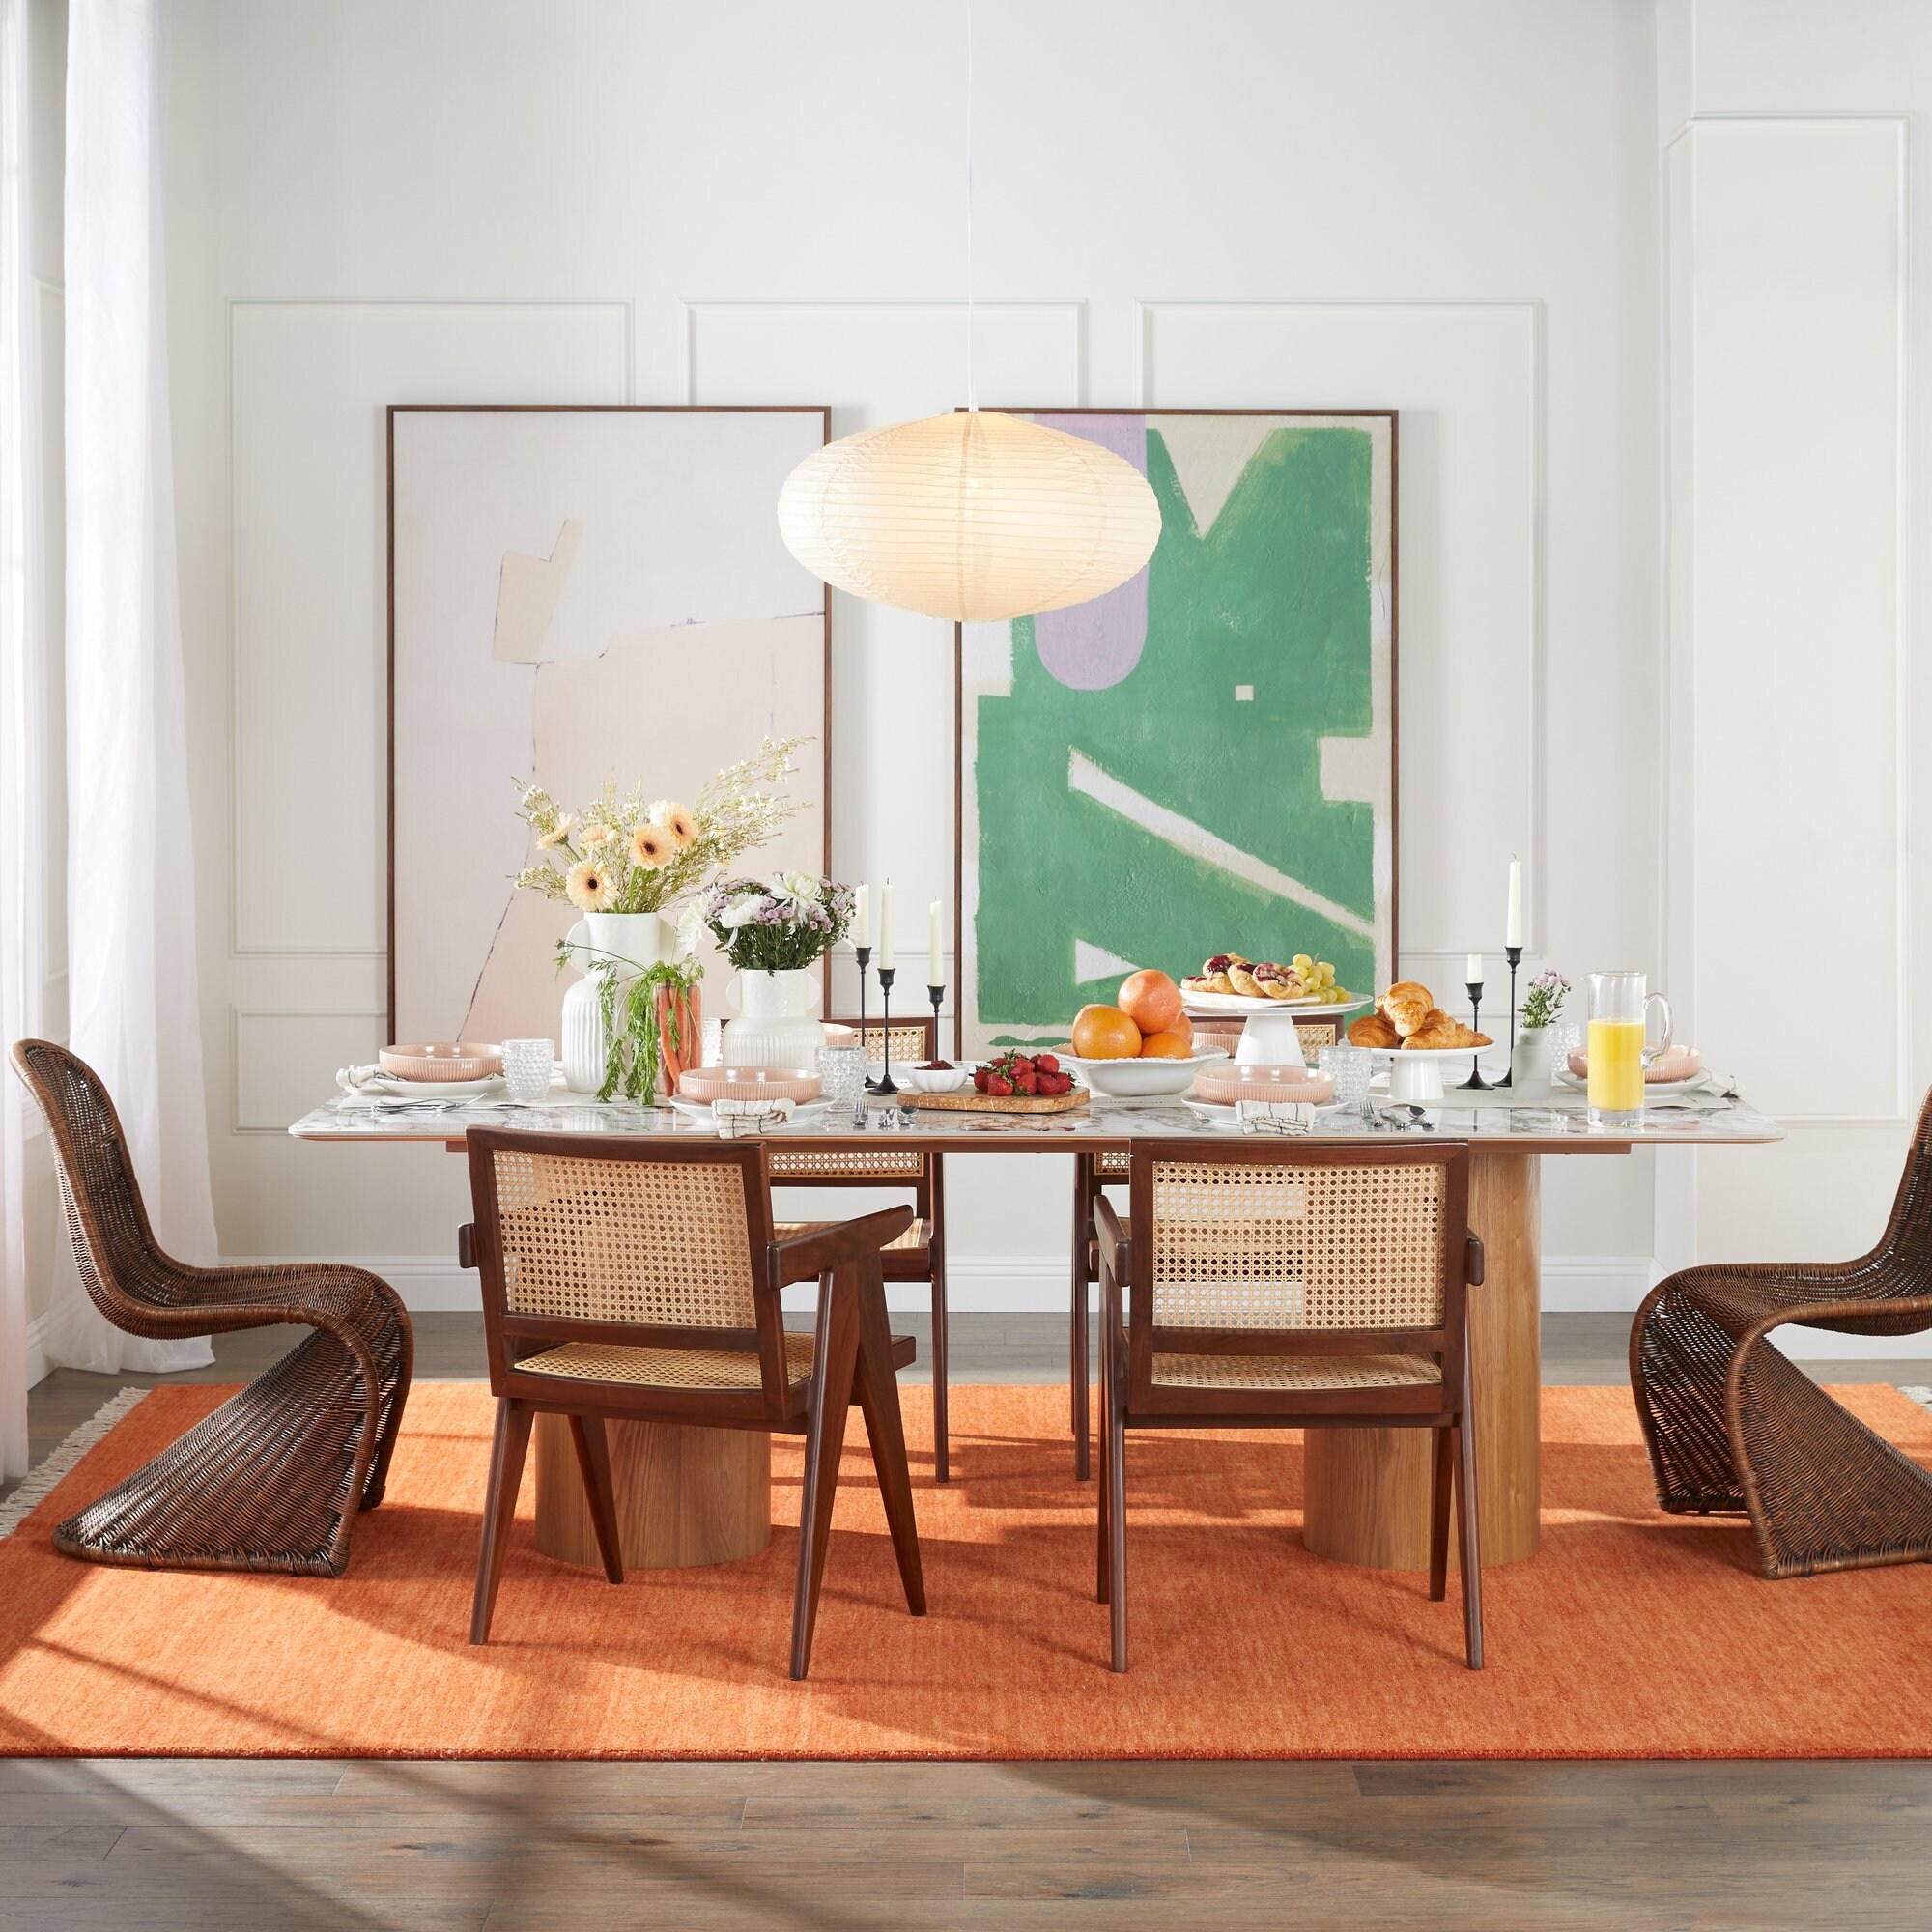 save an extra 15% on Select Dining Room Furniture*